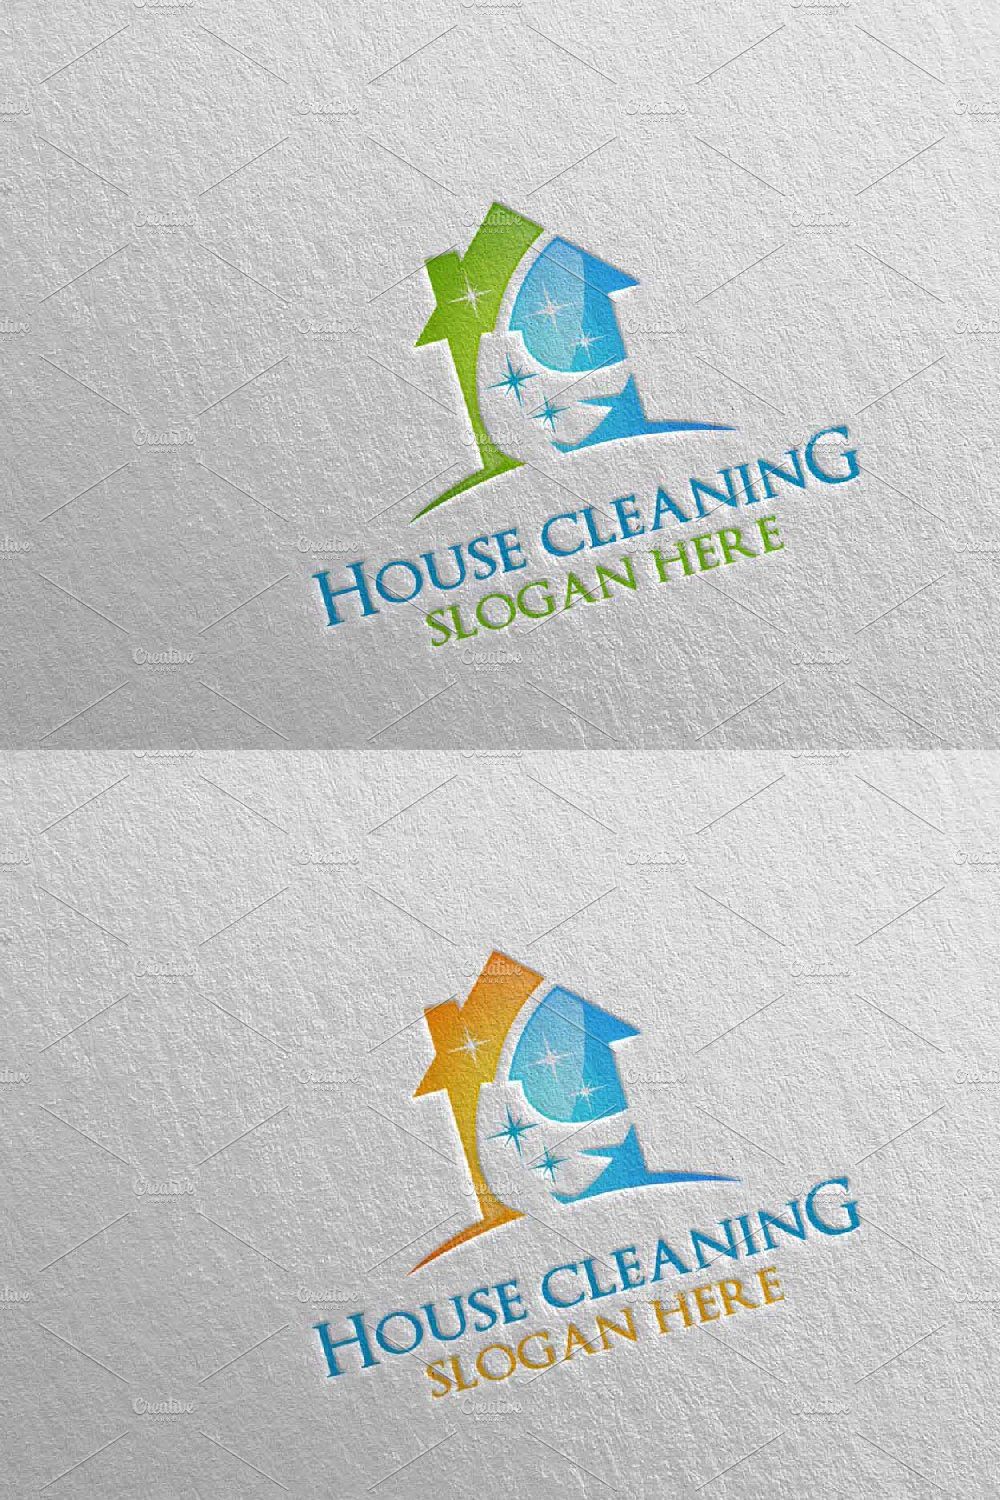 House cleaning services vector logo pinterest preview image.